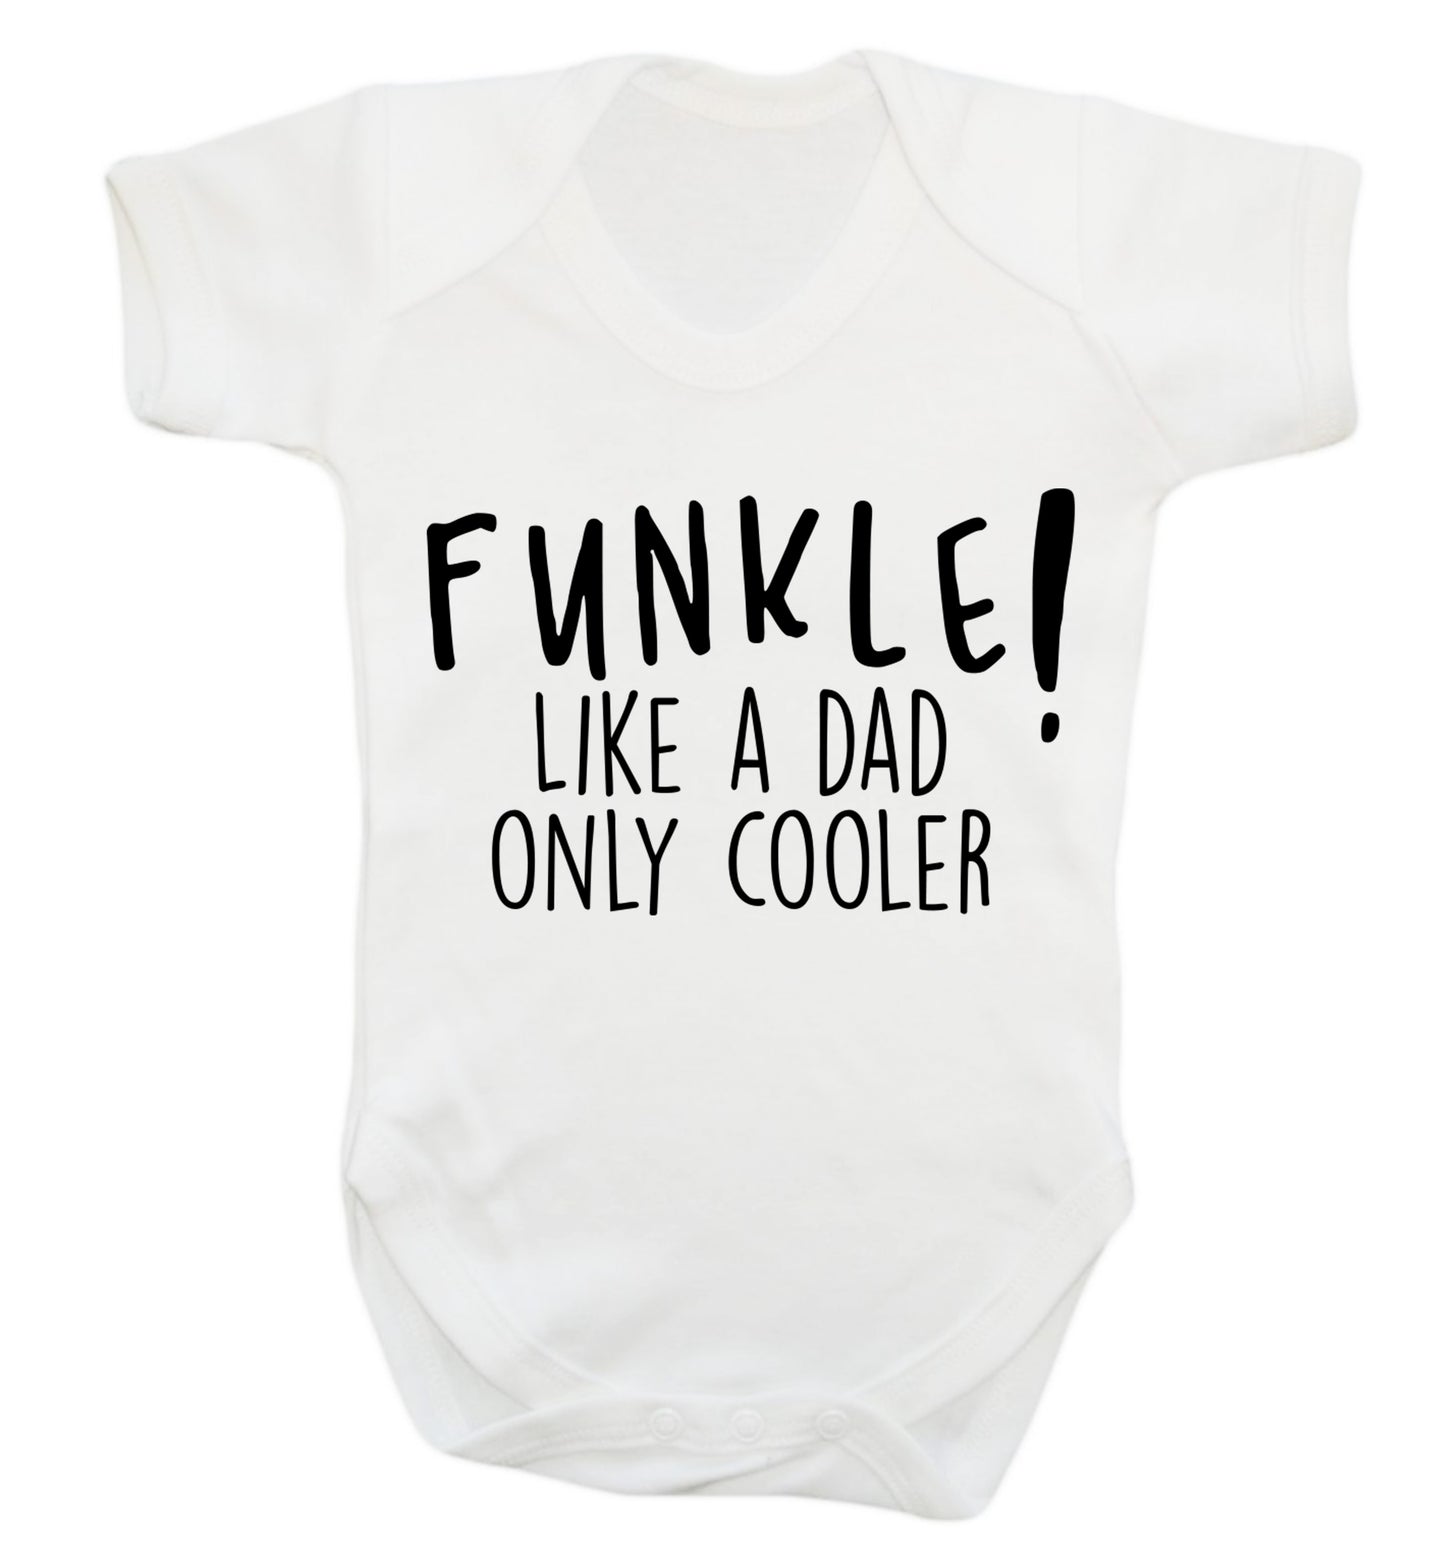 Funkle Like a Dad Only Cooler Baby Vest white 18-24 months